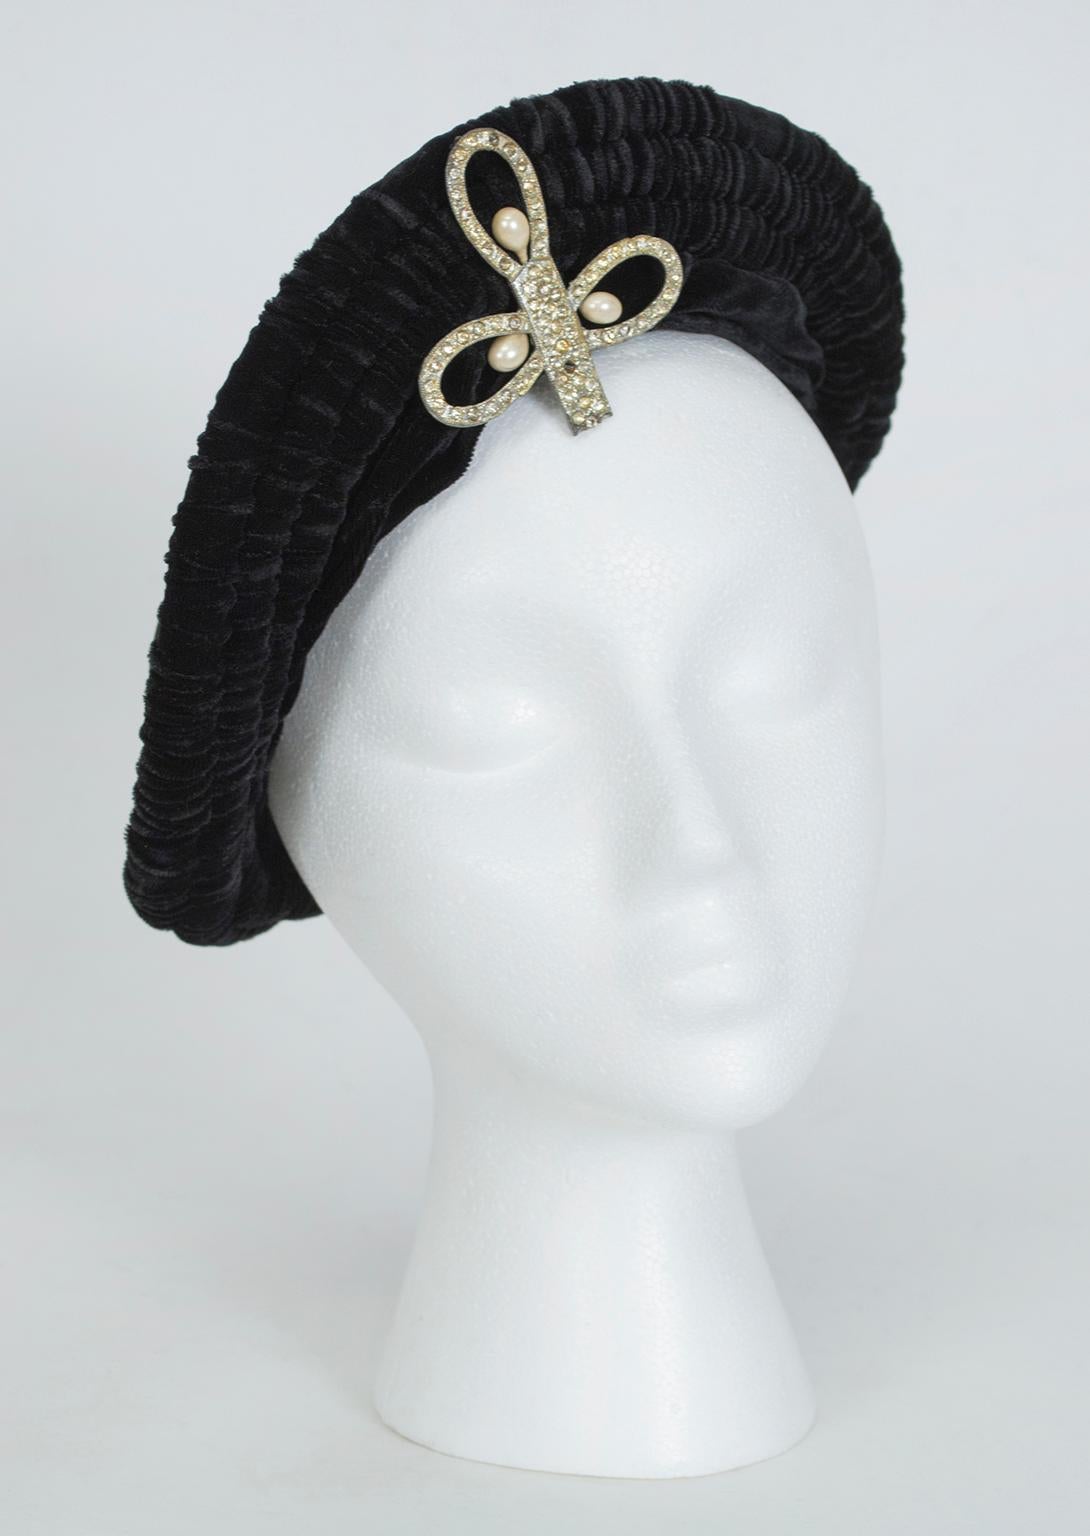 A hat with the regal bearing of a crown, this beret features a massive rhinestone center brooch and lends a royal touch to basic black formalwear.

Pliable silk velvet beret with rolled and gathered edge and 2” self surplice headband around front